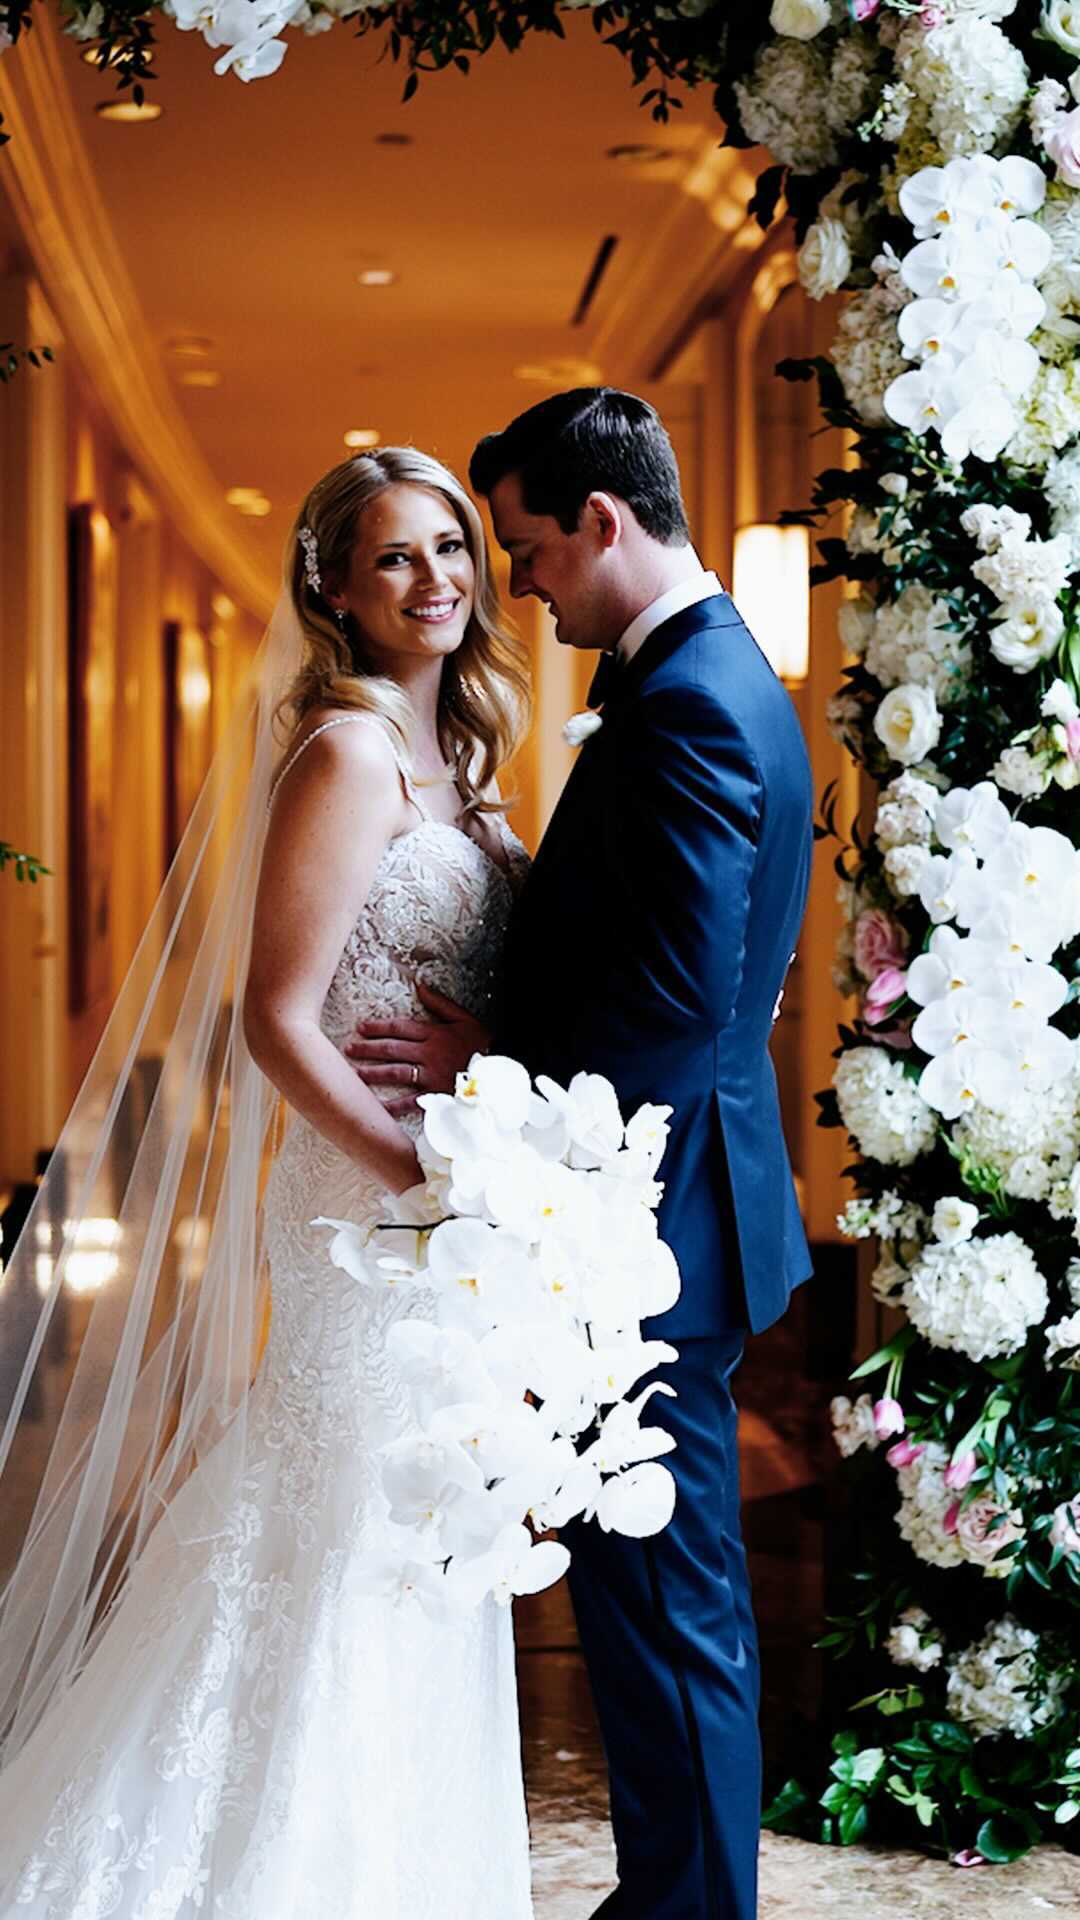 Wow! We were all stunned with the joyous love and beauty on display for @lauren_crow_2 & @mccrow44’s incredible wedding weekend. Can’t stop watching this over and over! 

Venue: Hotel Crescent Court, Dallas, TX @mycrescentwedding 
Date: May 1st, 2021
Planner: Park Cities Events @parkcitiesevents 
Florist: Branching Out Floral @branchingoutevents 
Hair/Makeup: Maitee Miles @maiteemiles 
Photographer: Carter Rose @carterrose 
Videographer: BSR Wedding Films @bsrweddingfilms 
Band: Jordan Kahn Orchestra @jordankahnorchestra 
Officiant: Matthew Ruffner @thisismatthewruffner 
Cake: Fancy cakes by Lauren @fancycakesbylauren 
Groom's Cake: Sugar Bee Sweets @sugarbeesweets 
Signage: Artifacture @artifacturestudios 
Rentals: Perch Decor @percheventdecor 
Lighting: Absolute Lighting @absolutelighting 
Linens and Tableware: Bella Acento @bellaacento 
Floor: Center Stage @centerstage_floors 
Exit Car: DFW Vintage Cars @dfwvintagecars 

Music licensed with @musicbed @bythecoastmusic 

#weddingppanner #dallasweddings #bsrweddingfilms #dallasweddingvideographer #dallasweddingvenue #luxurywedding #dfwweddings #crescentwedding #dallasweddingphotographer #weddinginspiration